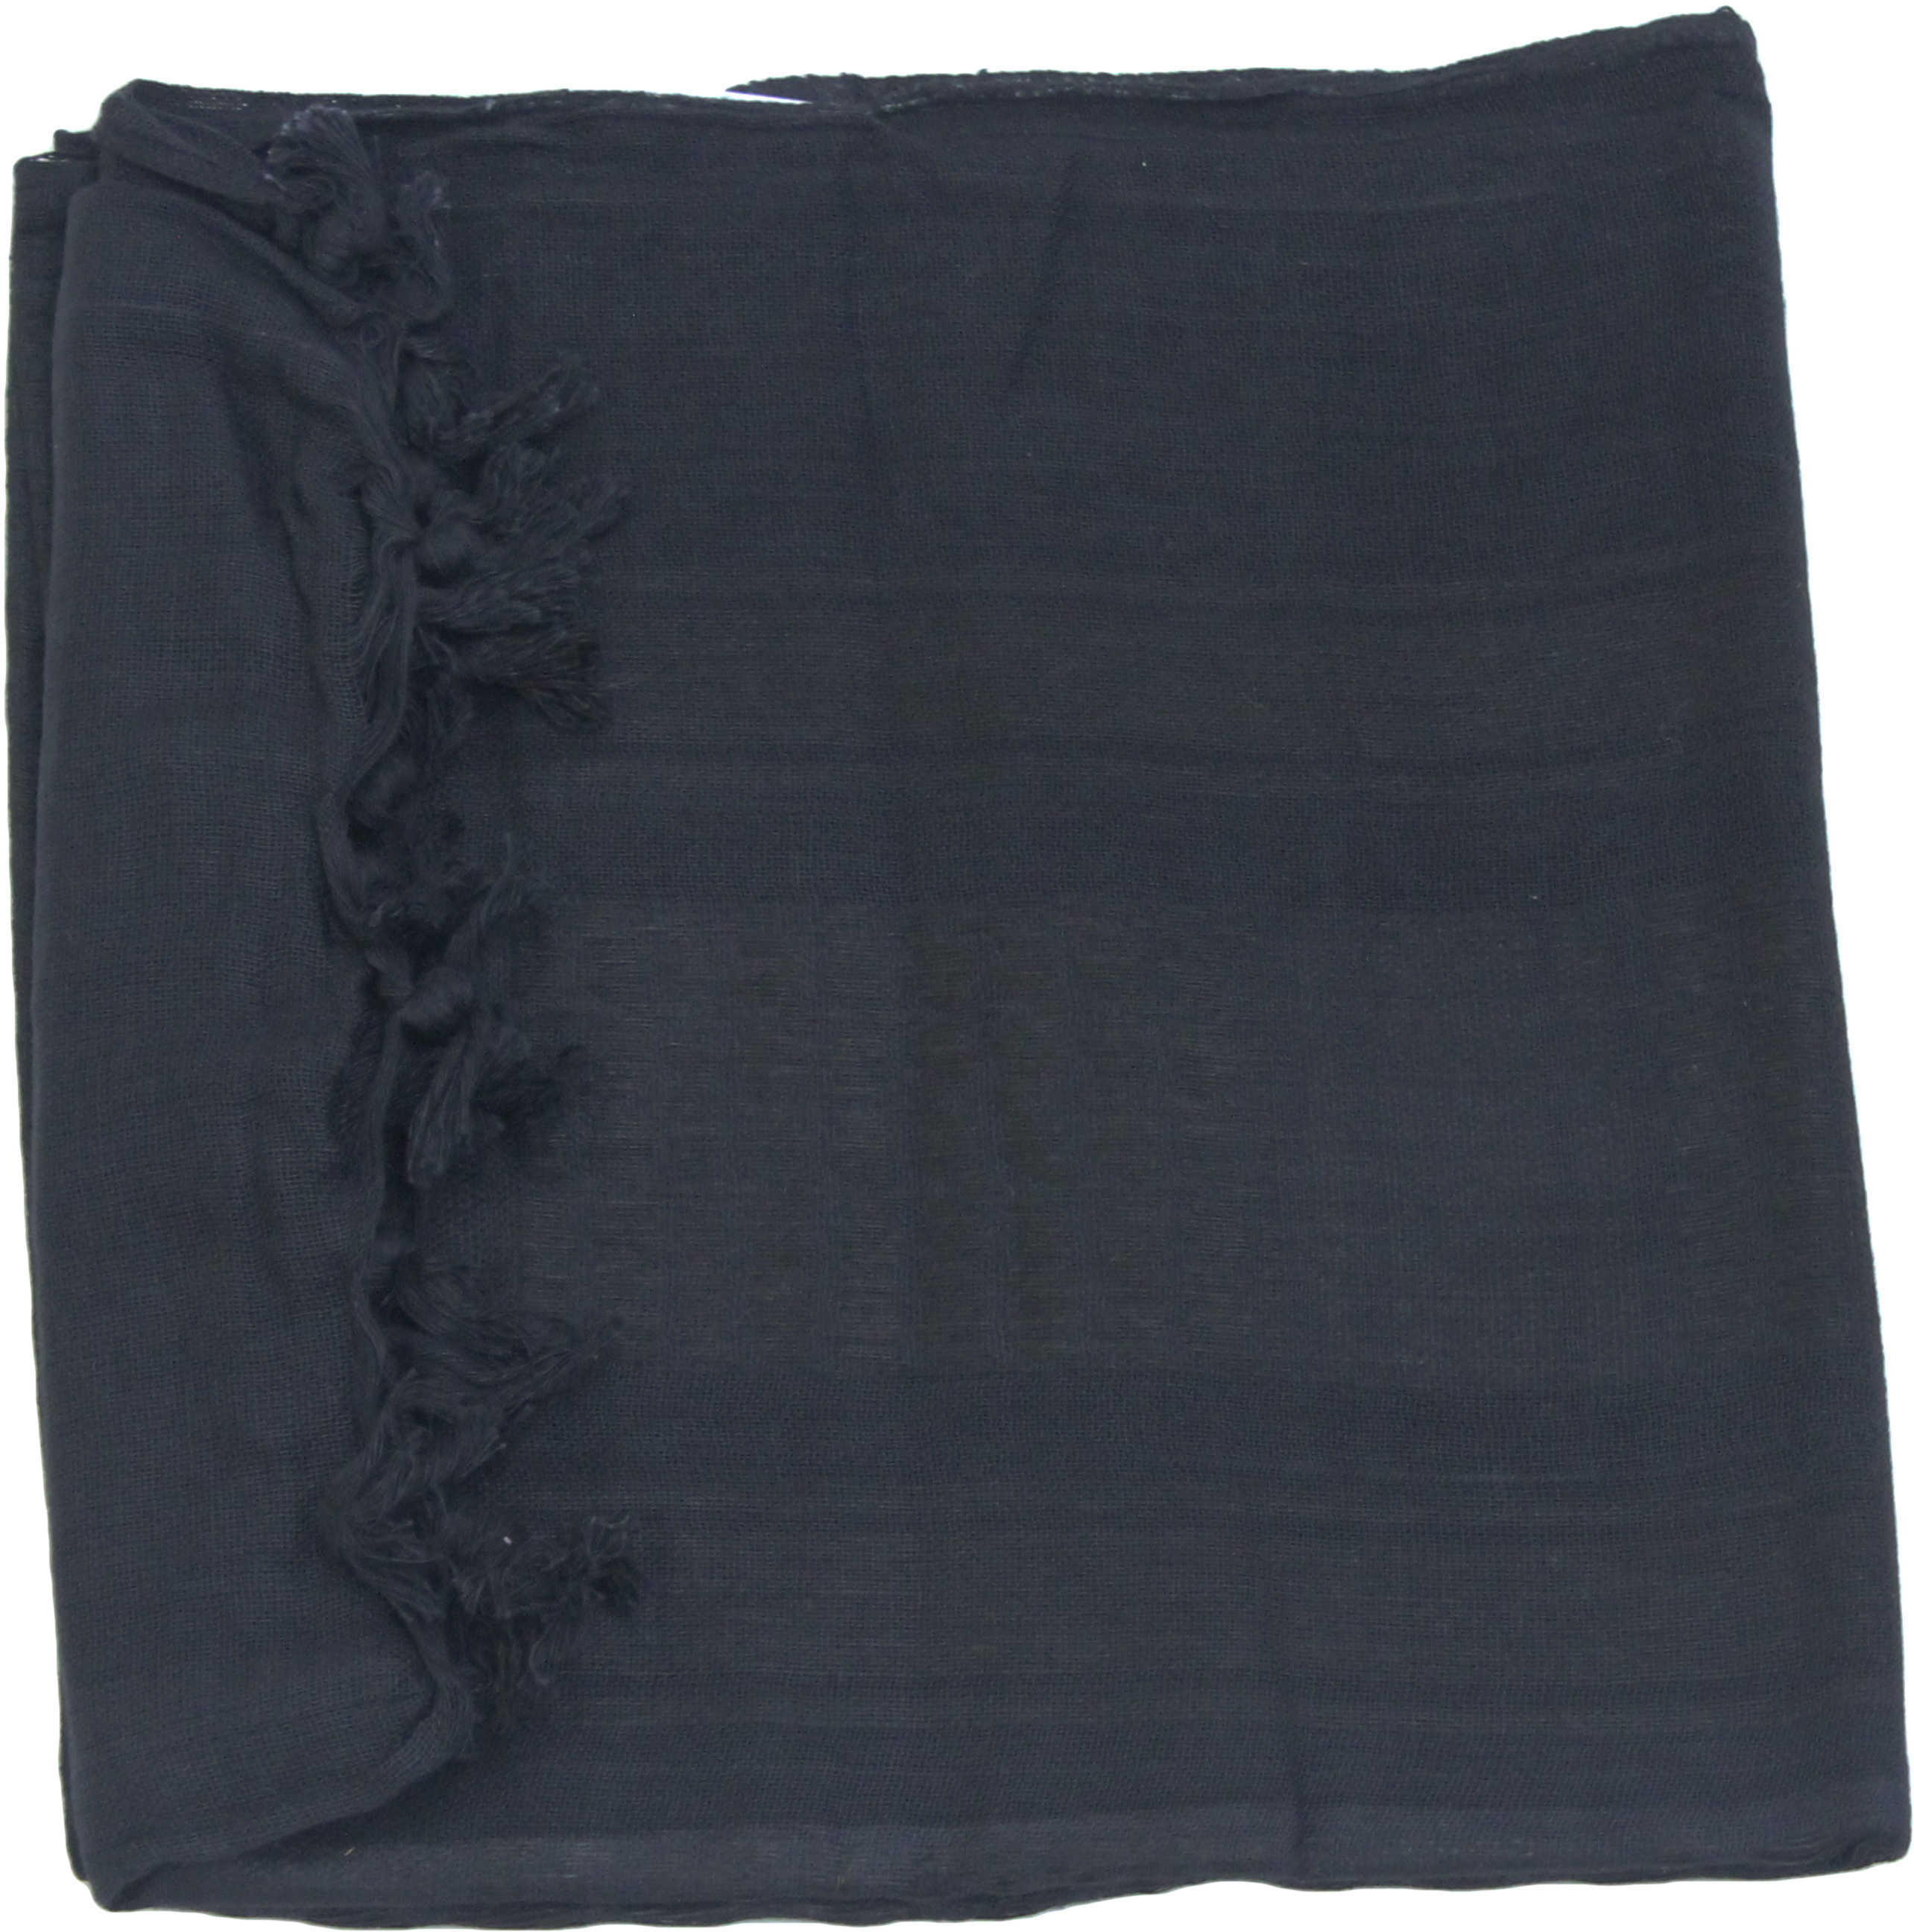 Camcon Shemagh - Black